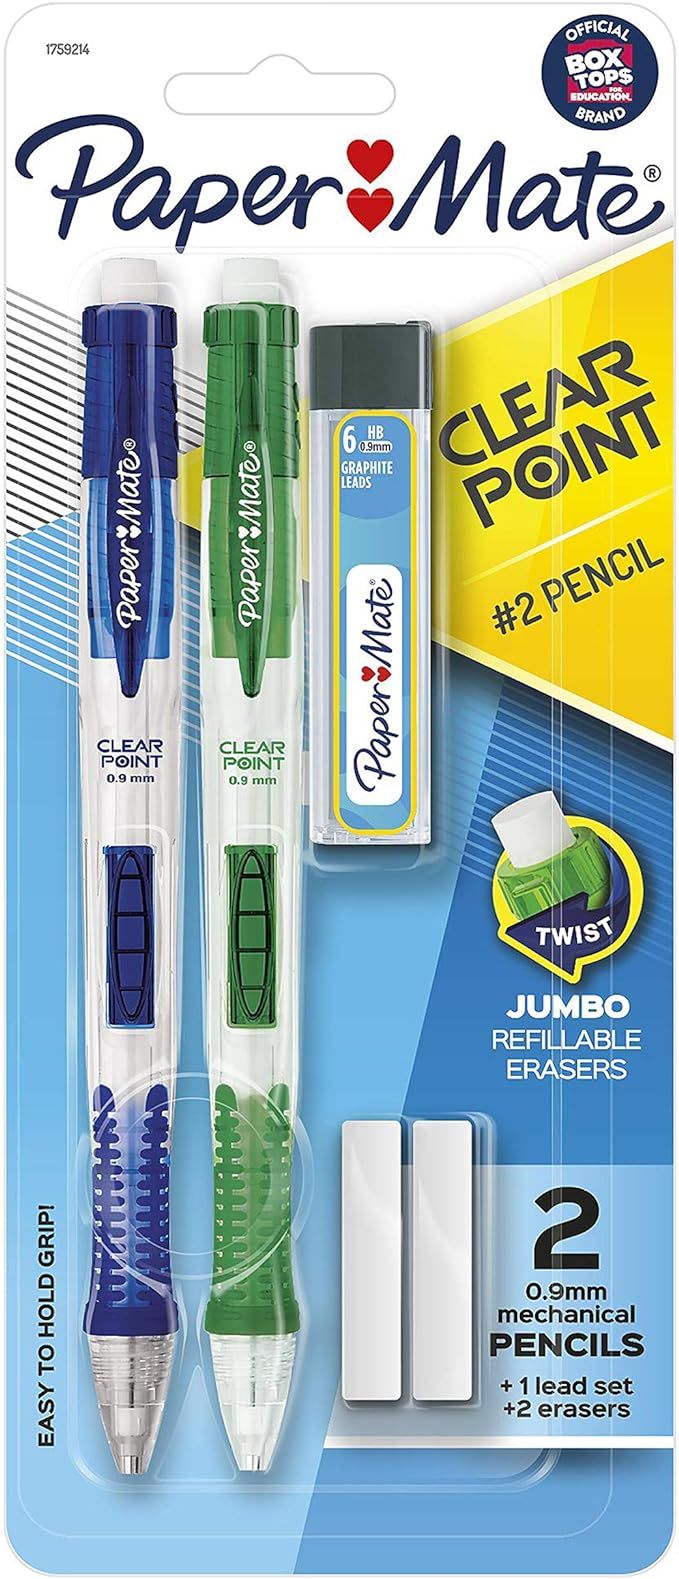 Paper Mate Clearpoint Mechanical Pencils and Lead Refills, 0.9 mm #2 Pencil | Pencils for School ... | Amazon (US)